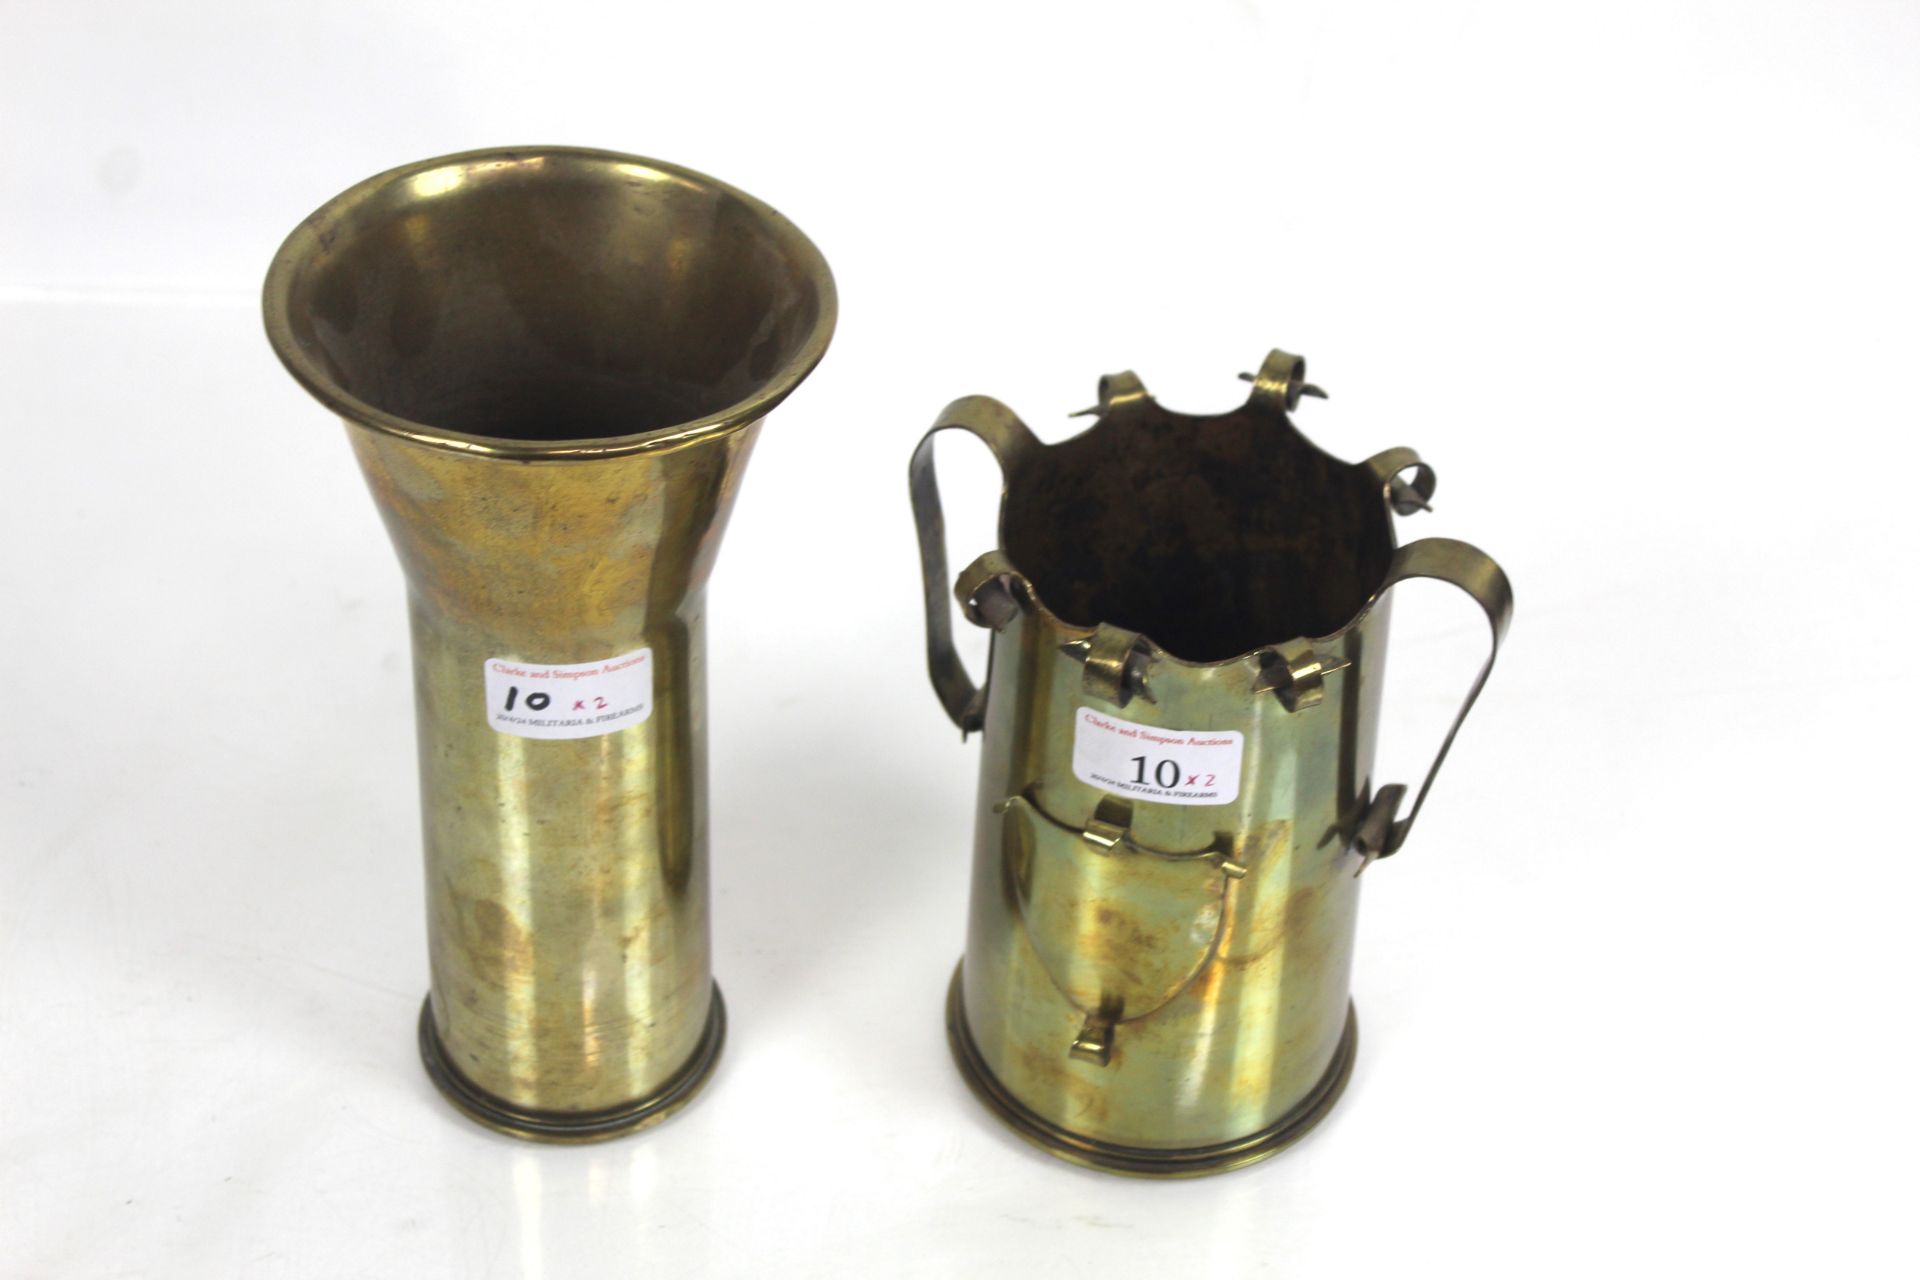 A "Trench Art" twin handled vase from a 1915 dated